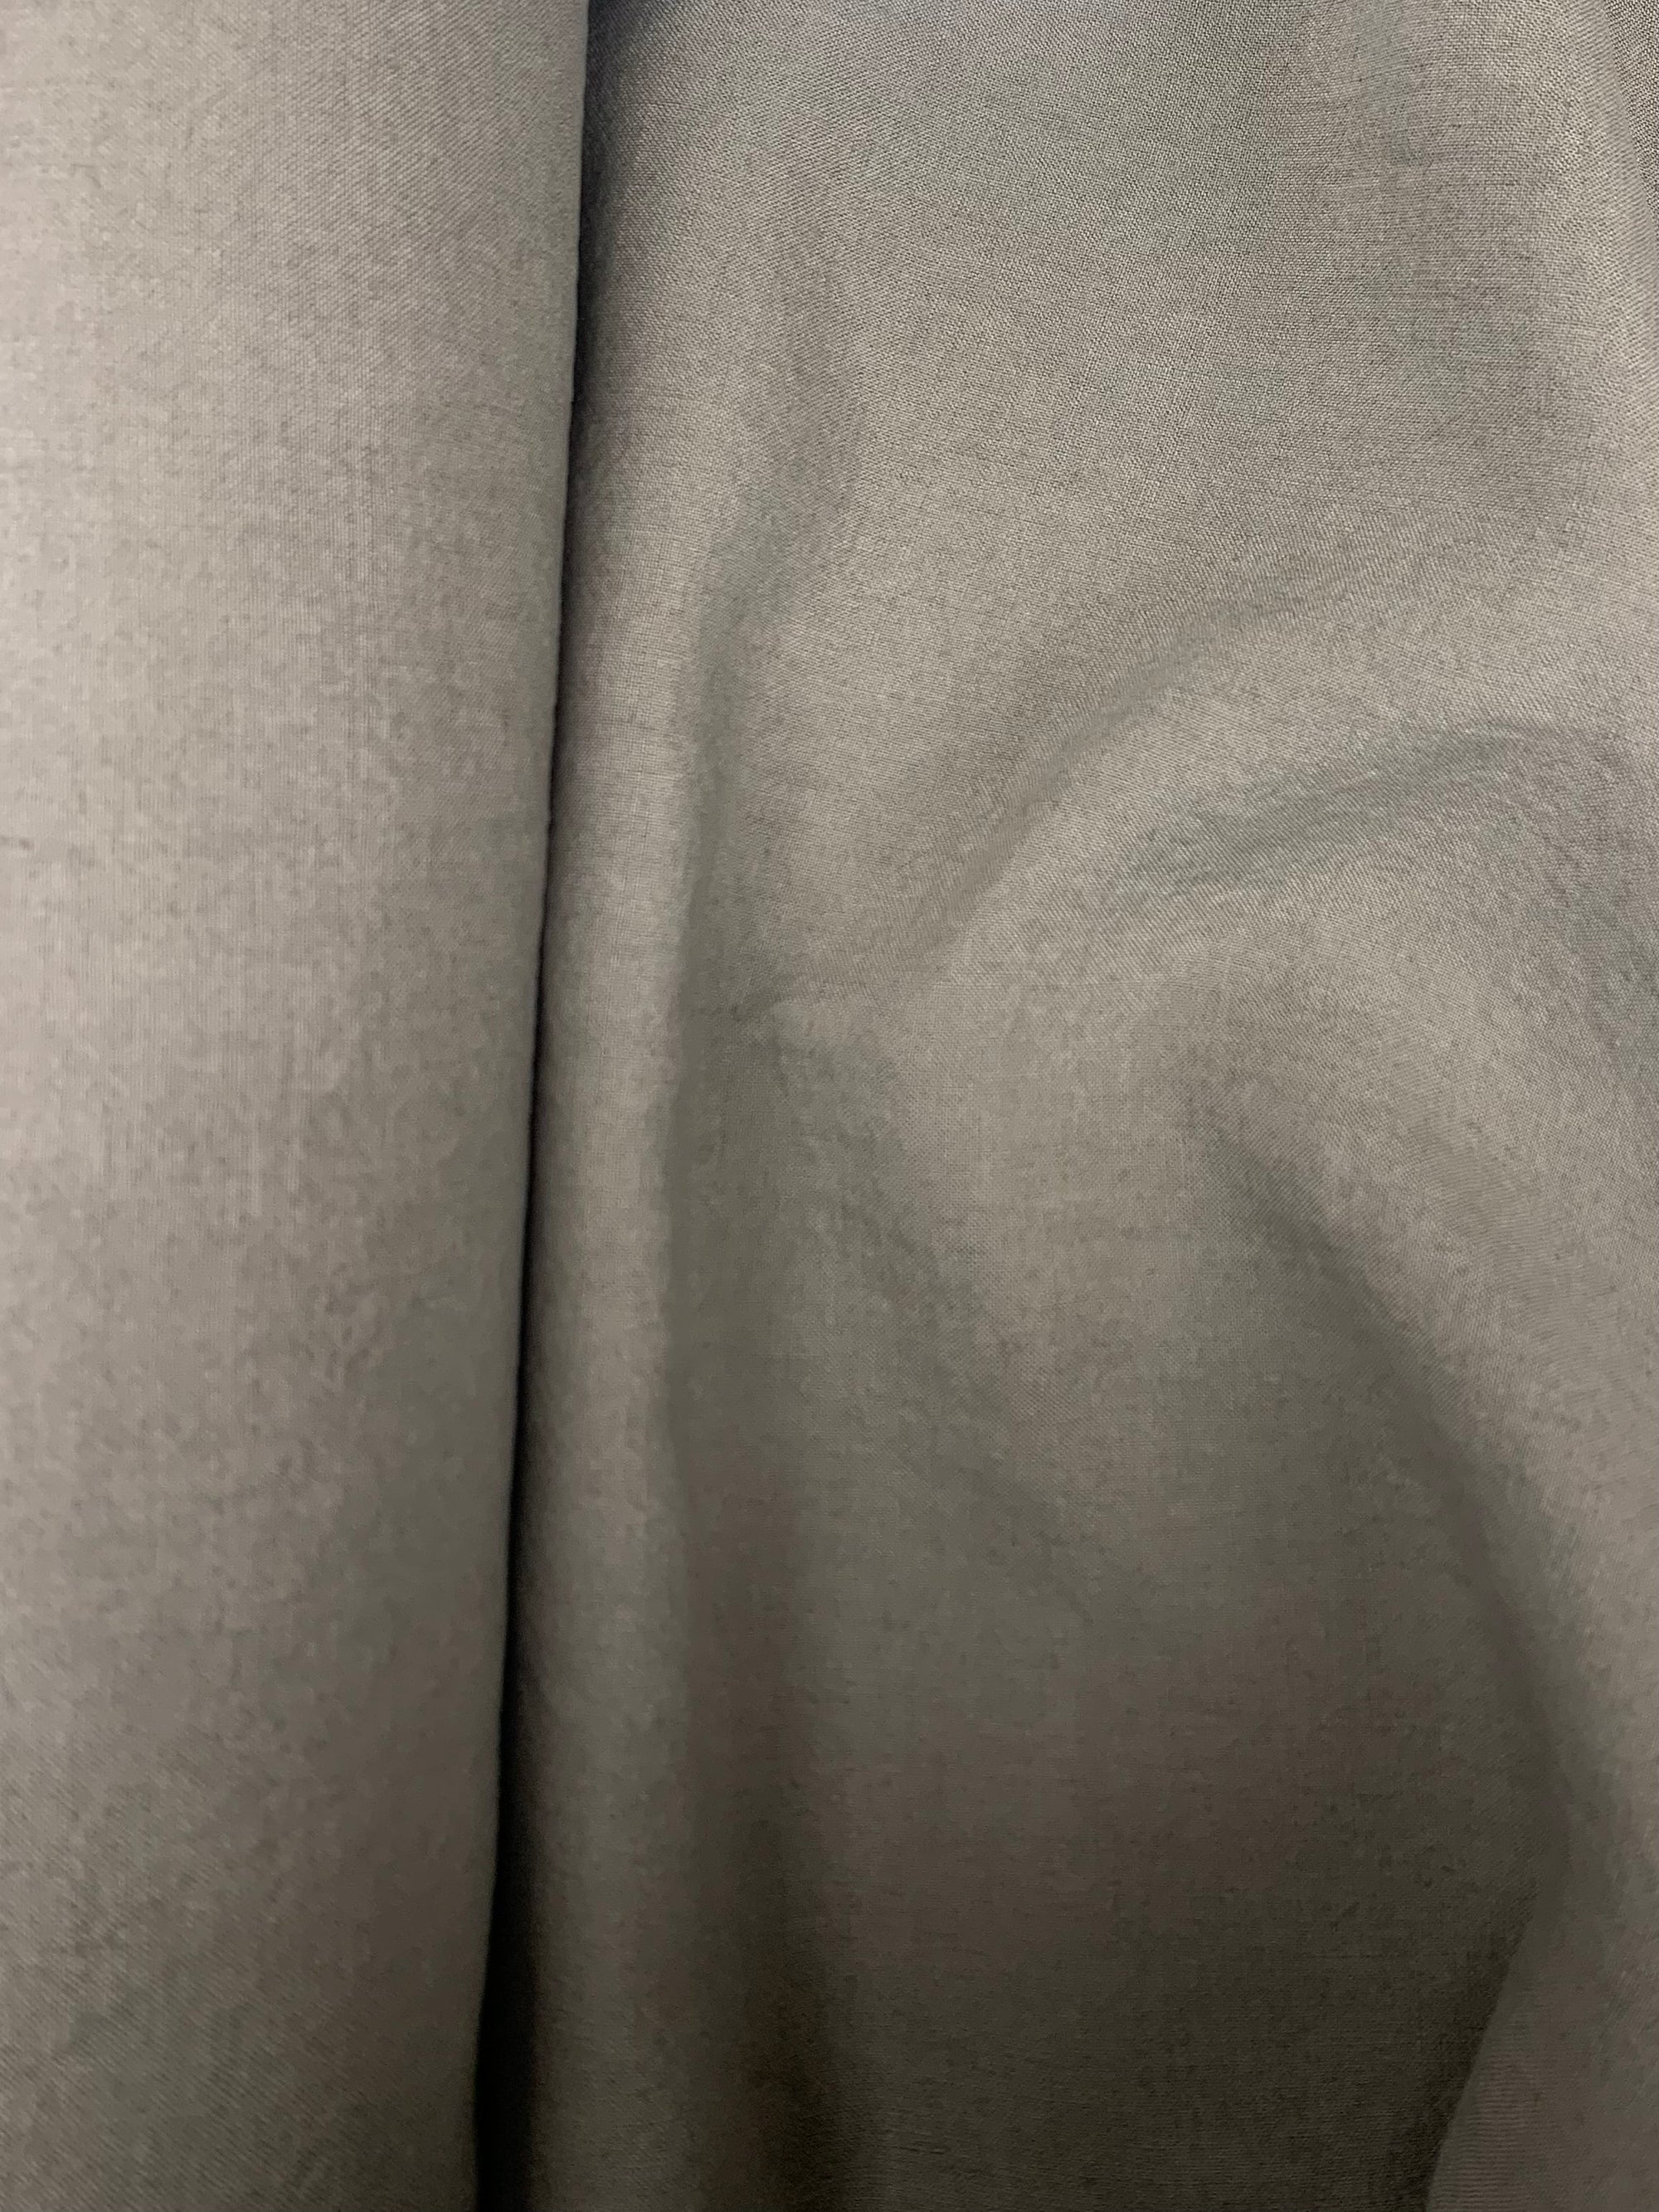  mediumweight linen fabric is a opaque warm gray stone color